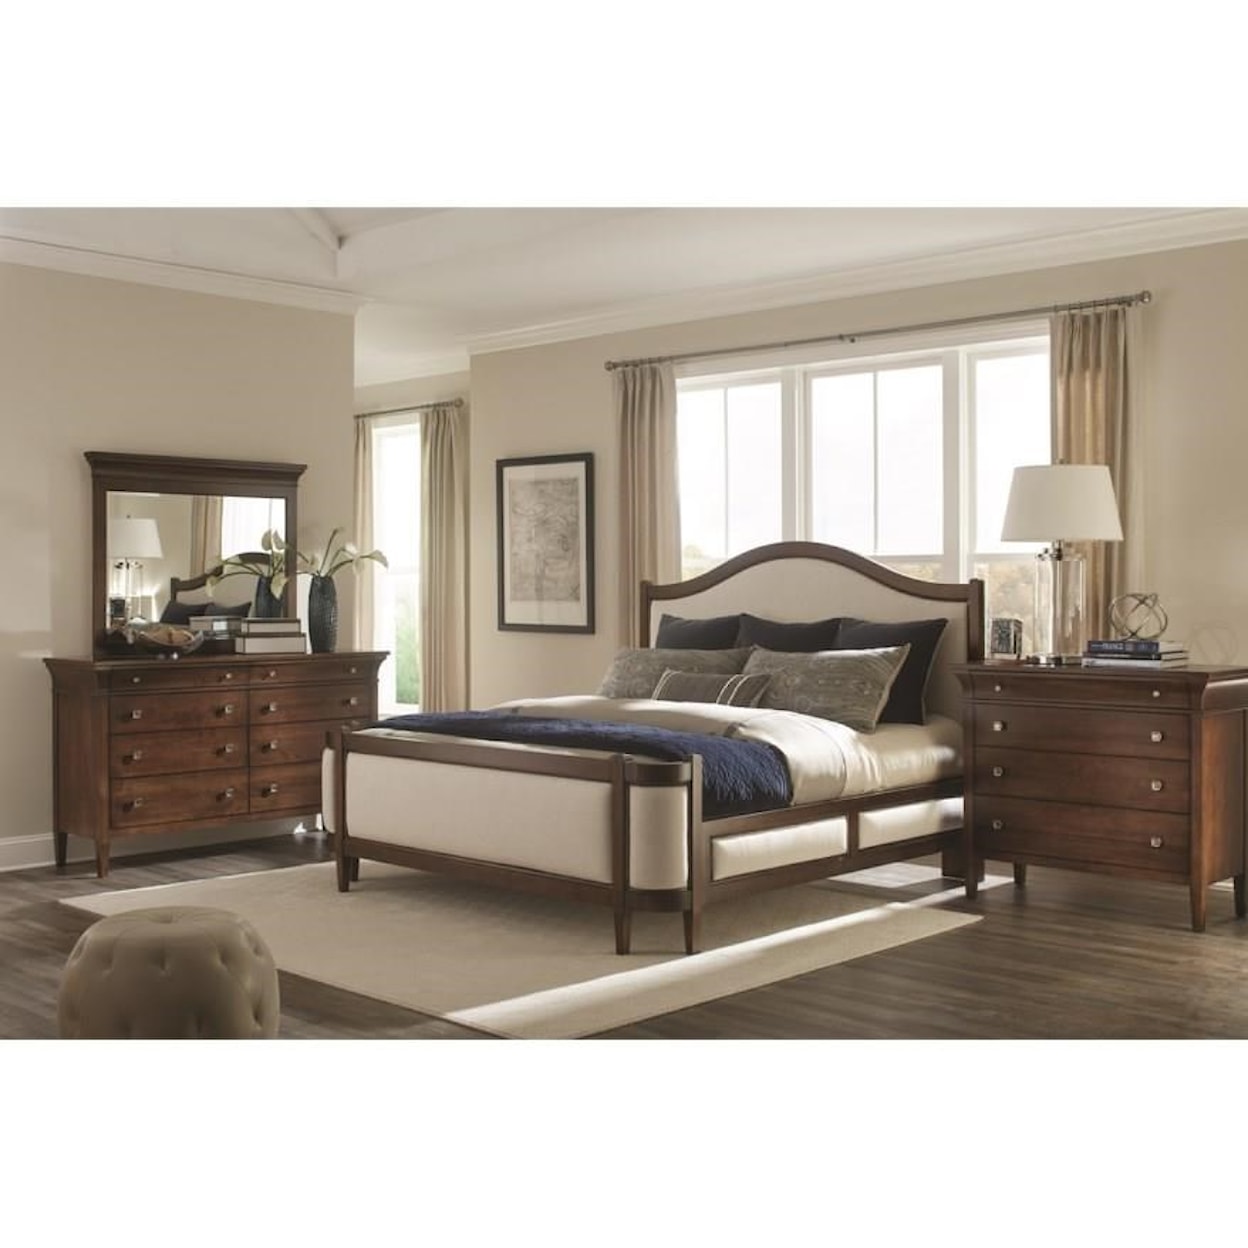 Durham Prominence King Grand Upholstered Bed